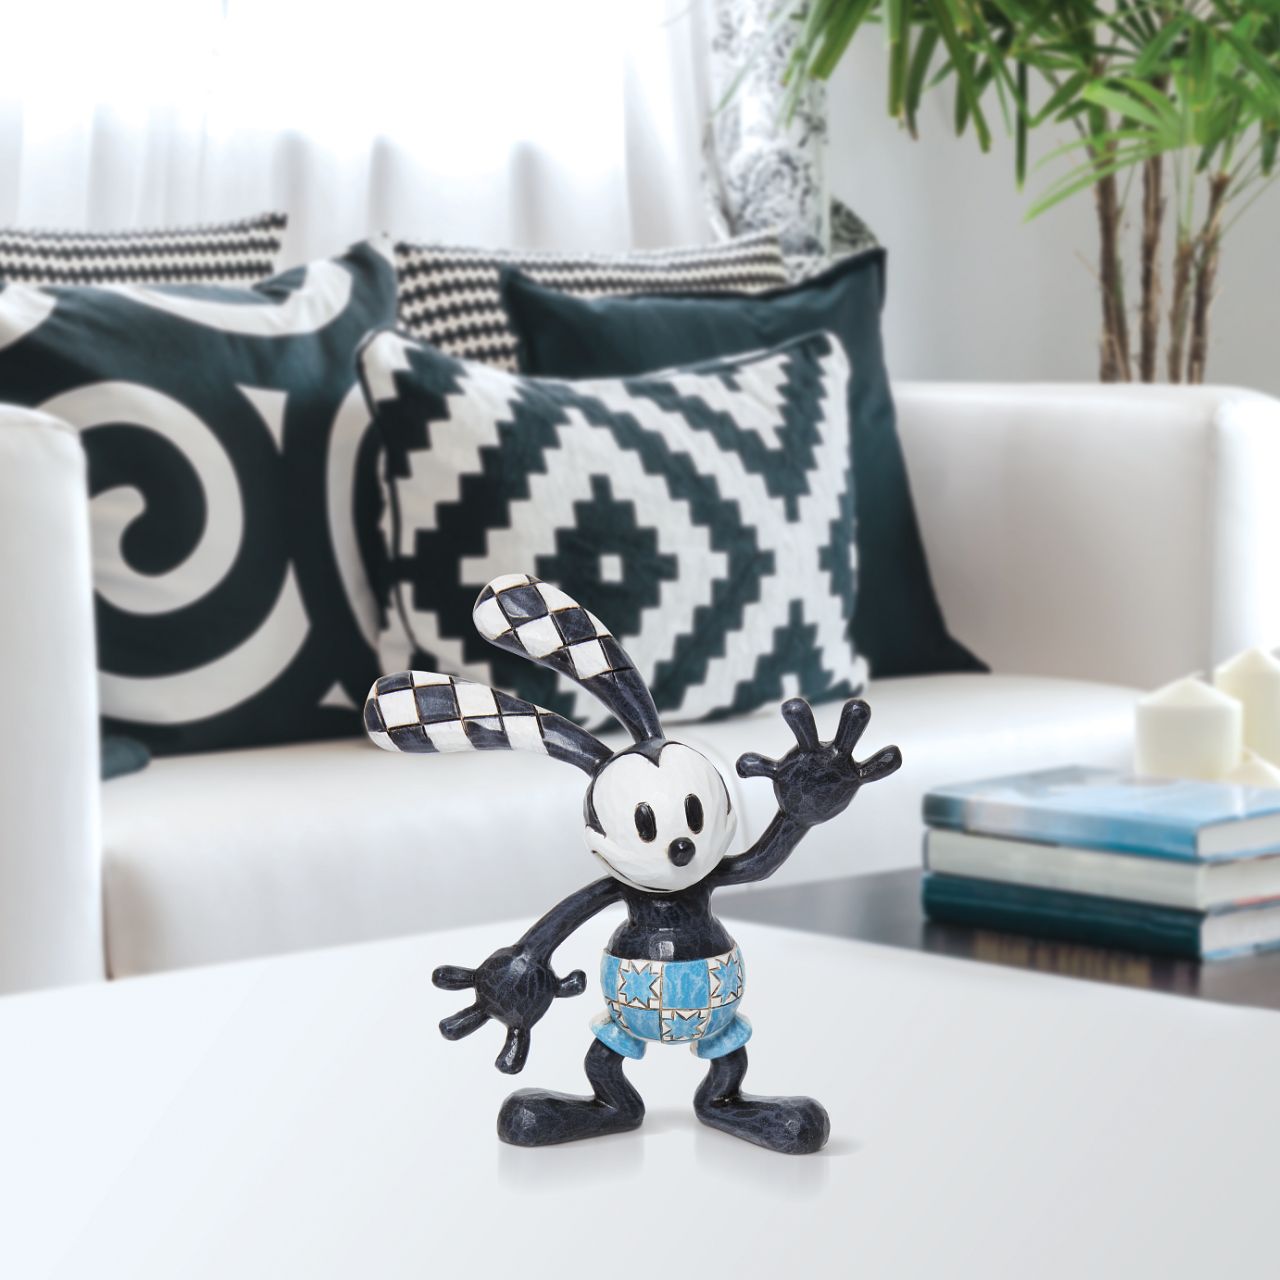 This cute piece of Disney's Oswald has been recreated as a collectible Mini Figurine. Designed by award winning artist Jim Shore, hand crafted using high quality cast stone and hand painted. 